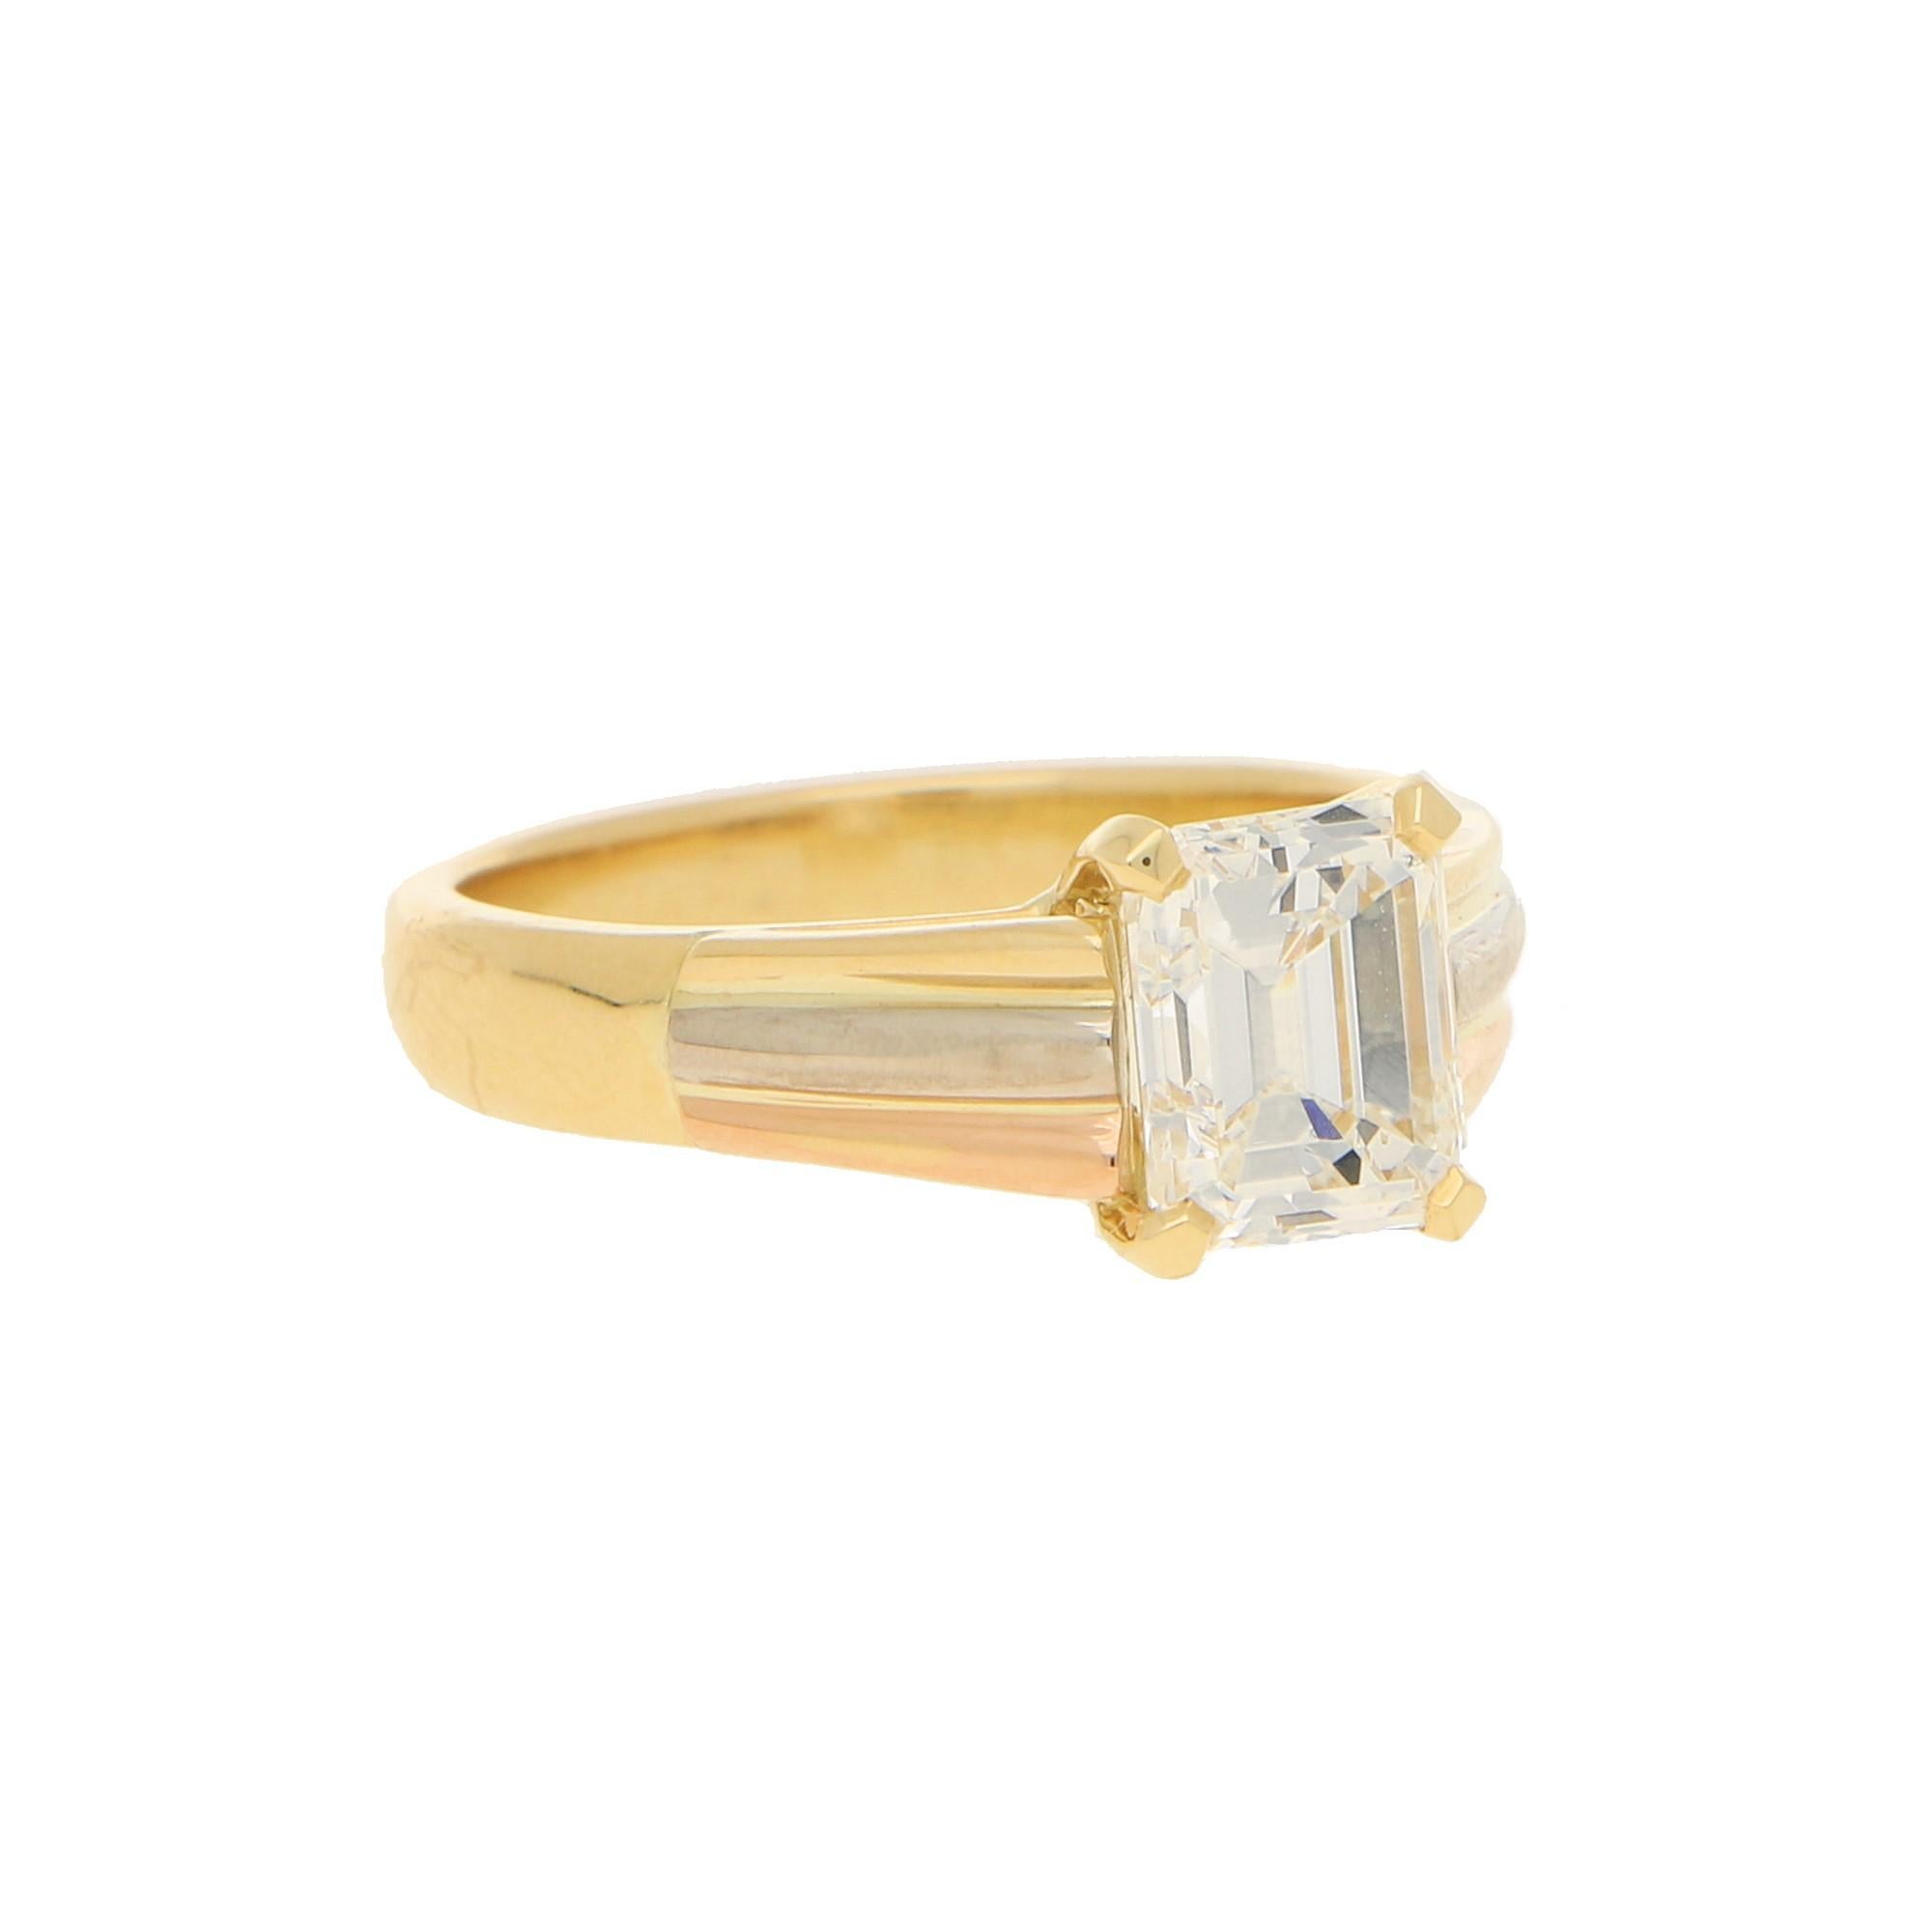 A beautiful certified emerald cut diamond solitaire engagement ring set in 18k yellow, rose and white gold.

The piece is predominantly set with a lovely 2.07 carat certified emerald cut diamond, which is securely four claw set to center. To either